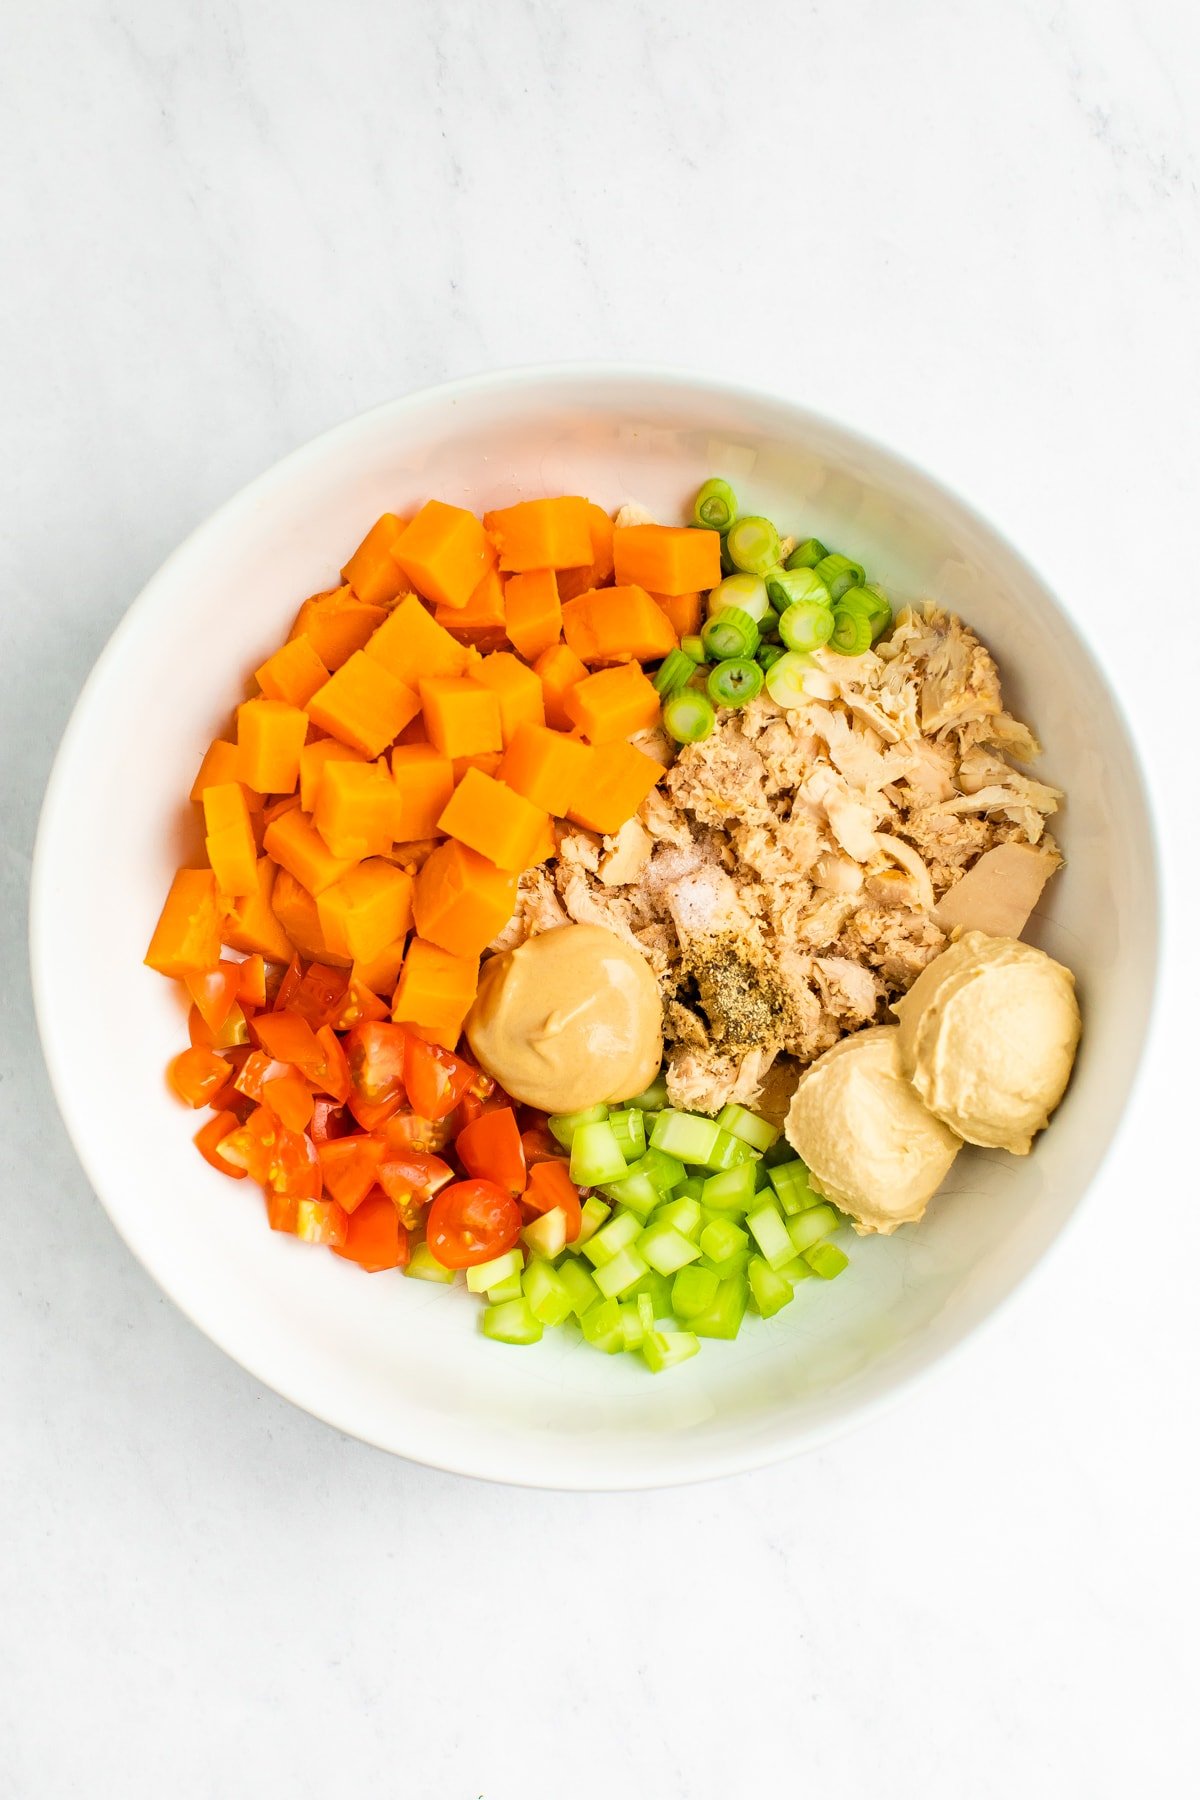 Bowl with sweet potatoes, green onion, tuna, hummus, spices, mustard, celery and tomatoes.